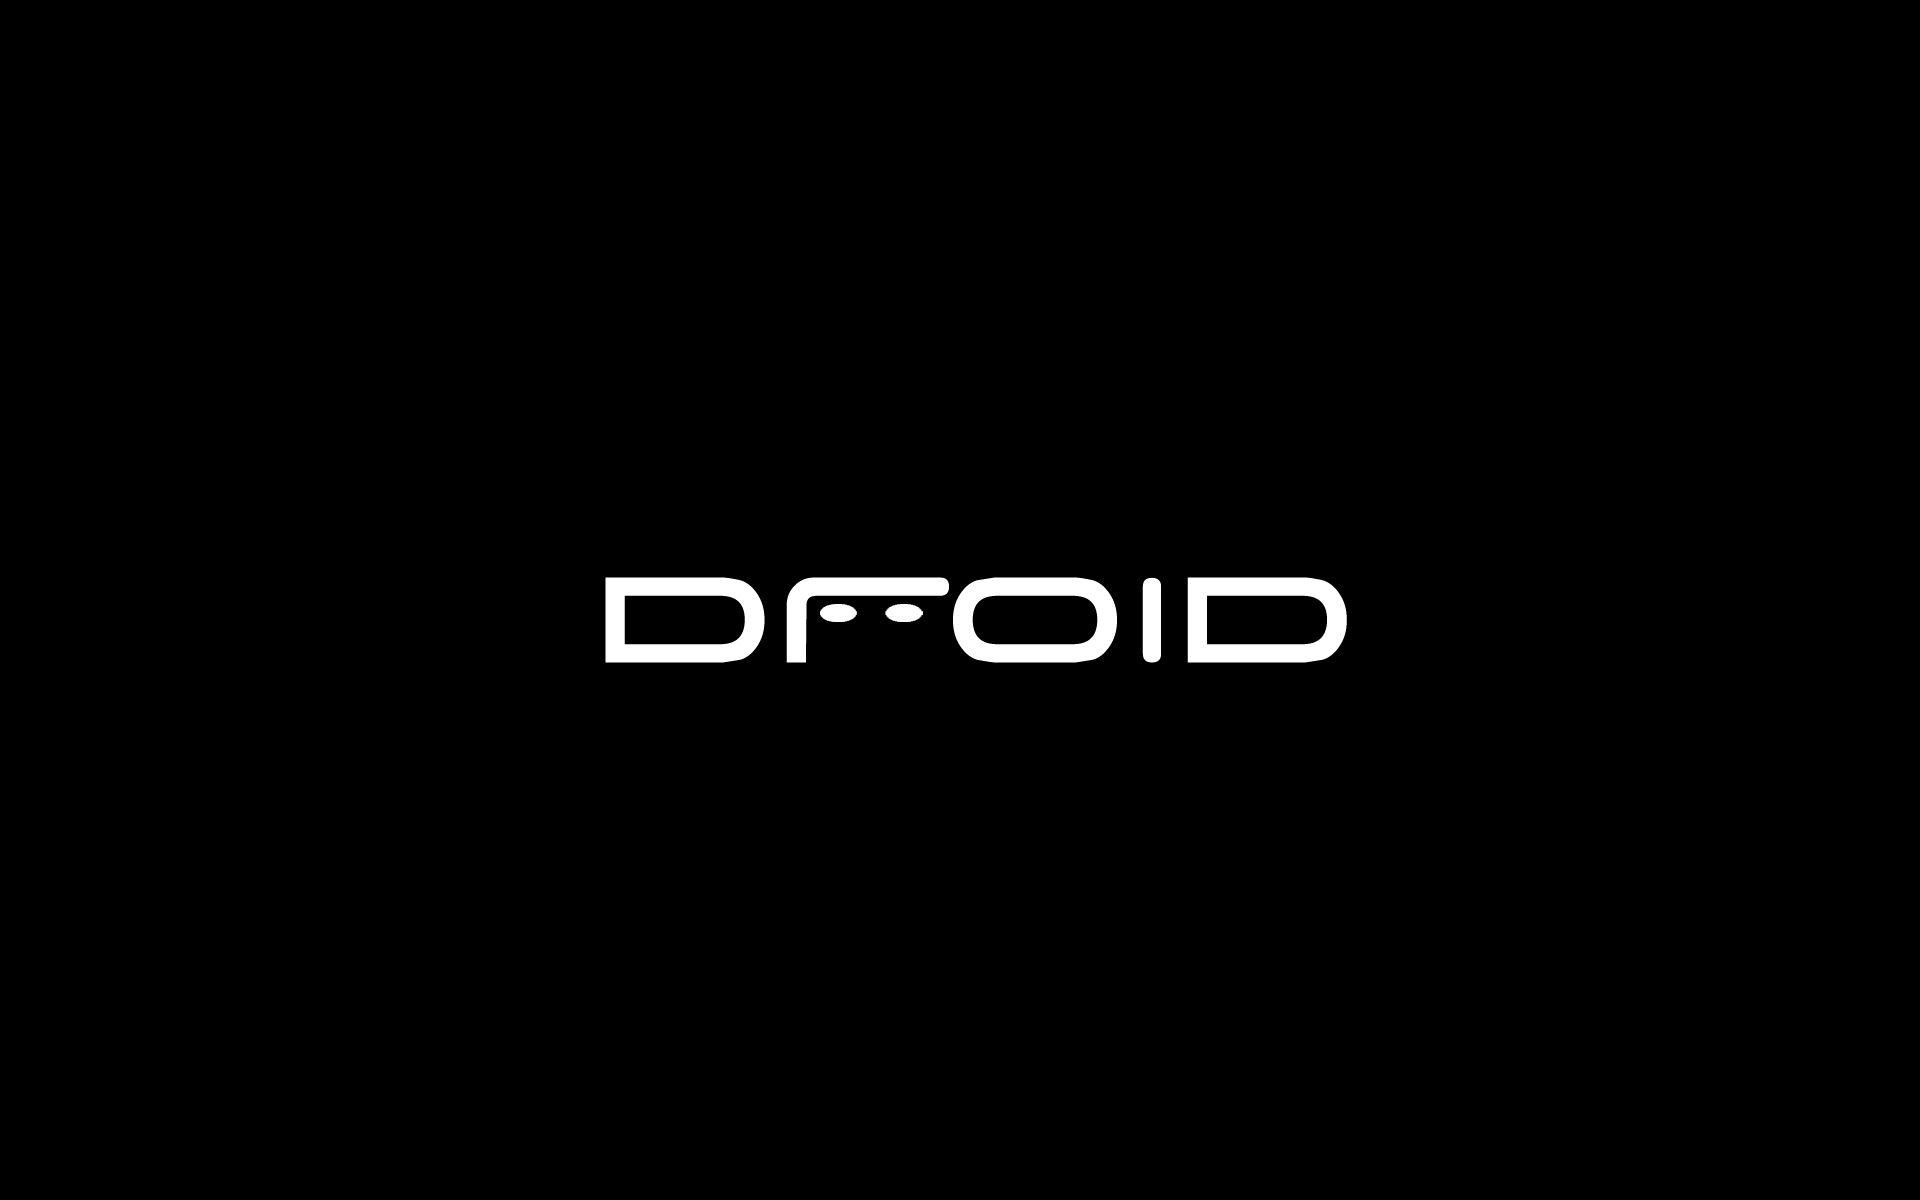 Droid Logo - Motorola Droid Turbo to be Announced on October 28 - n3rdabl3